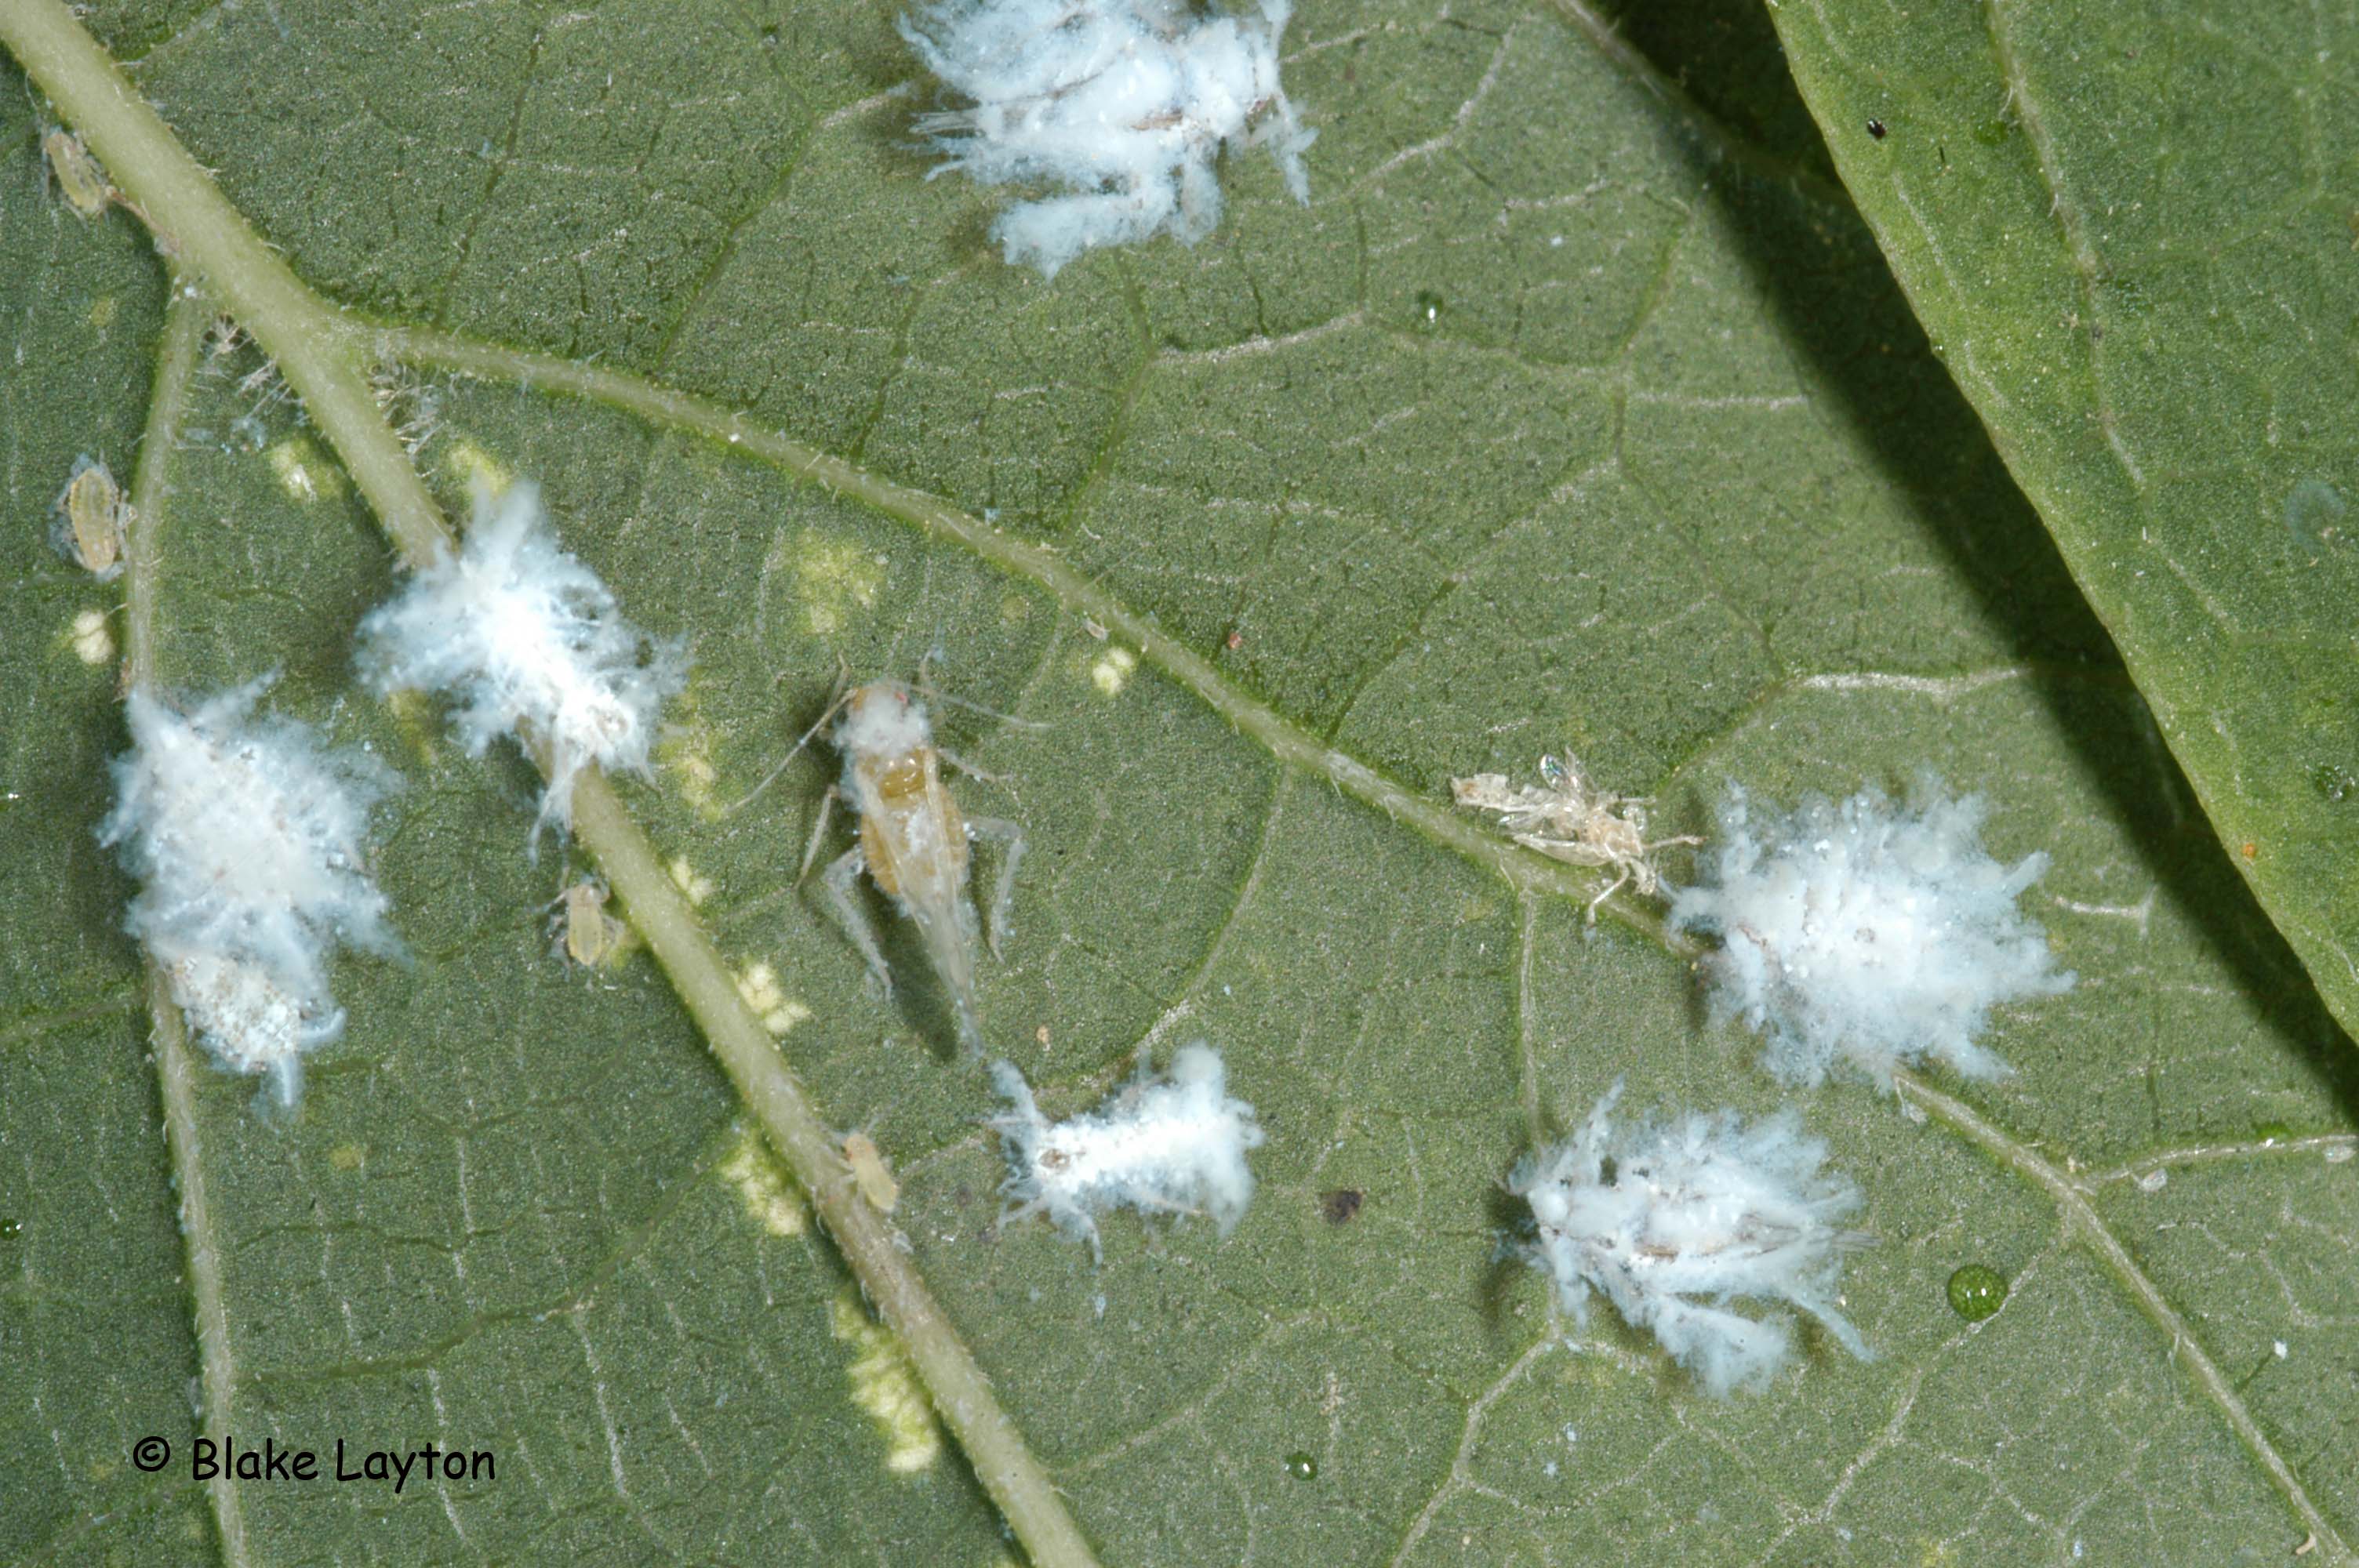 insects covered with fluffy white material 